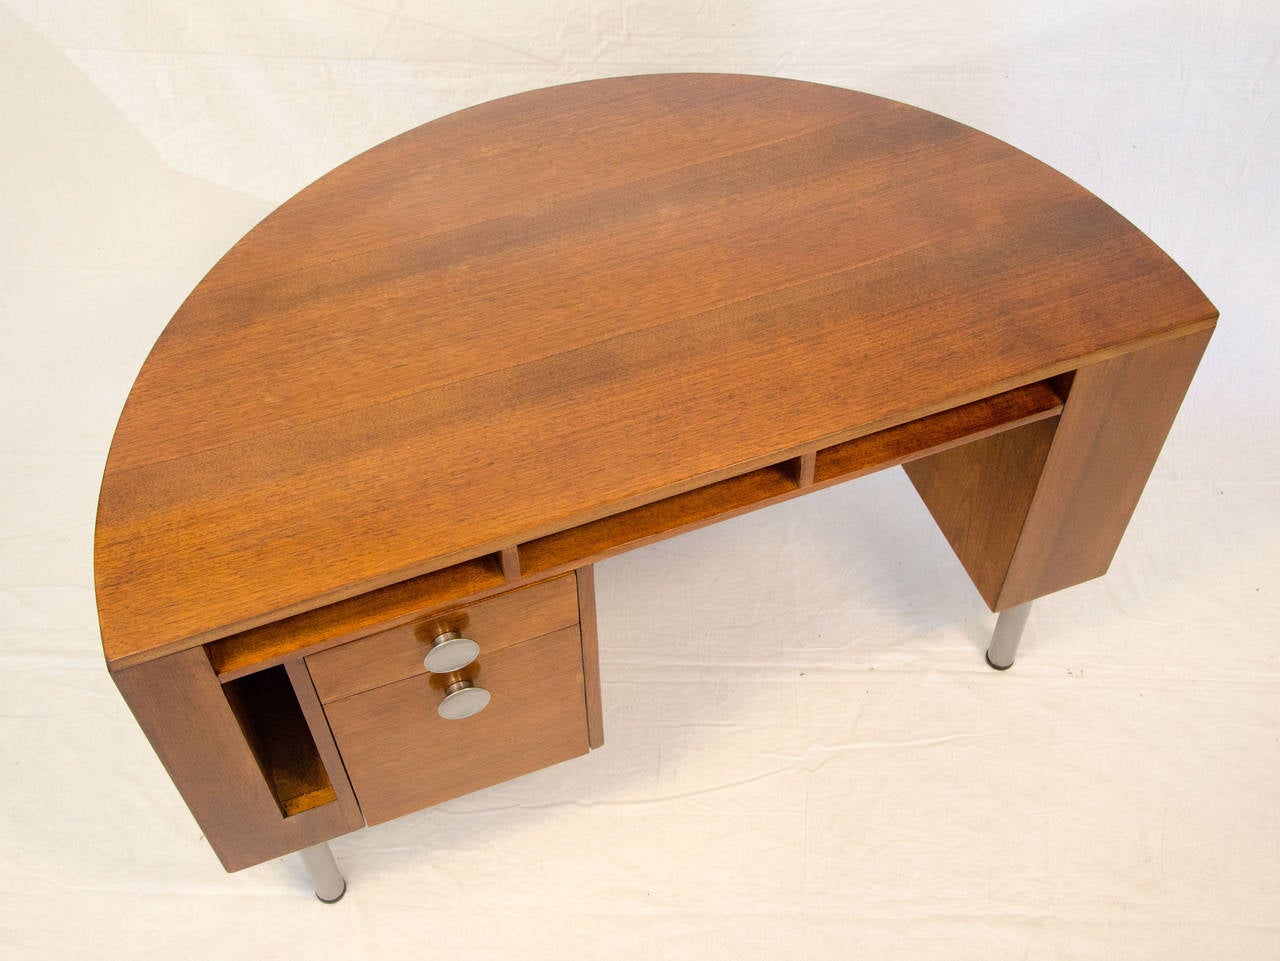 Polished Rare Art Deco Demilune Desk by Gilbert Rohde for Herman Miller